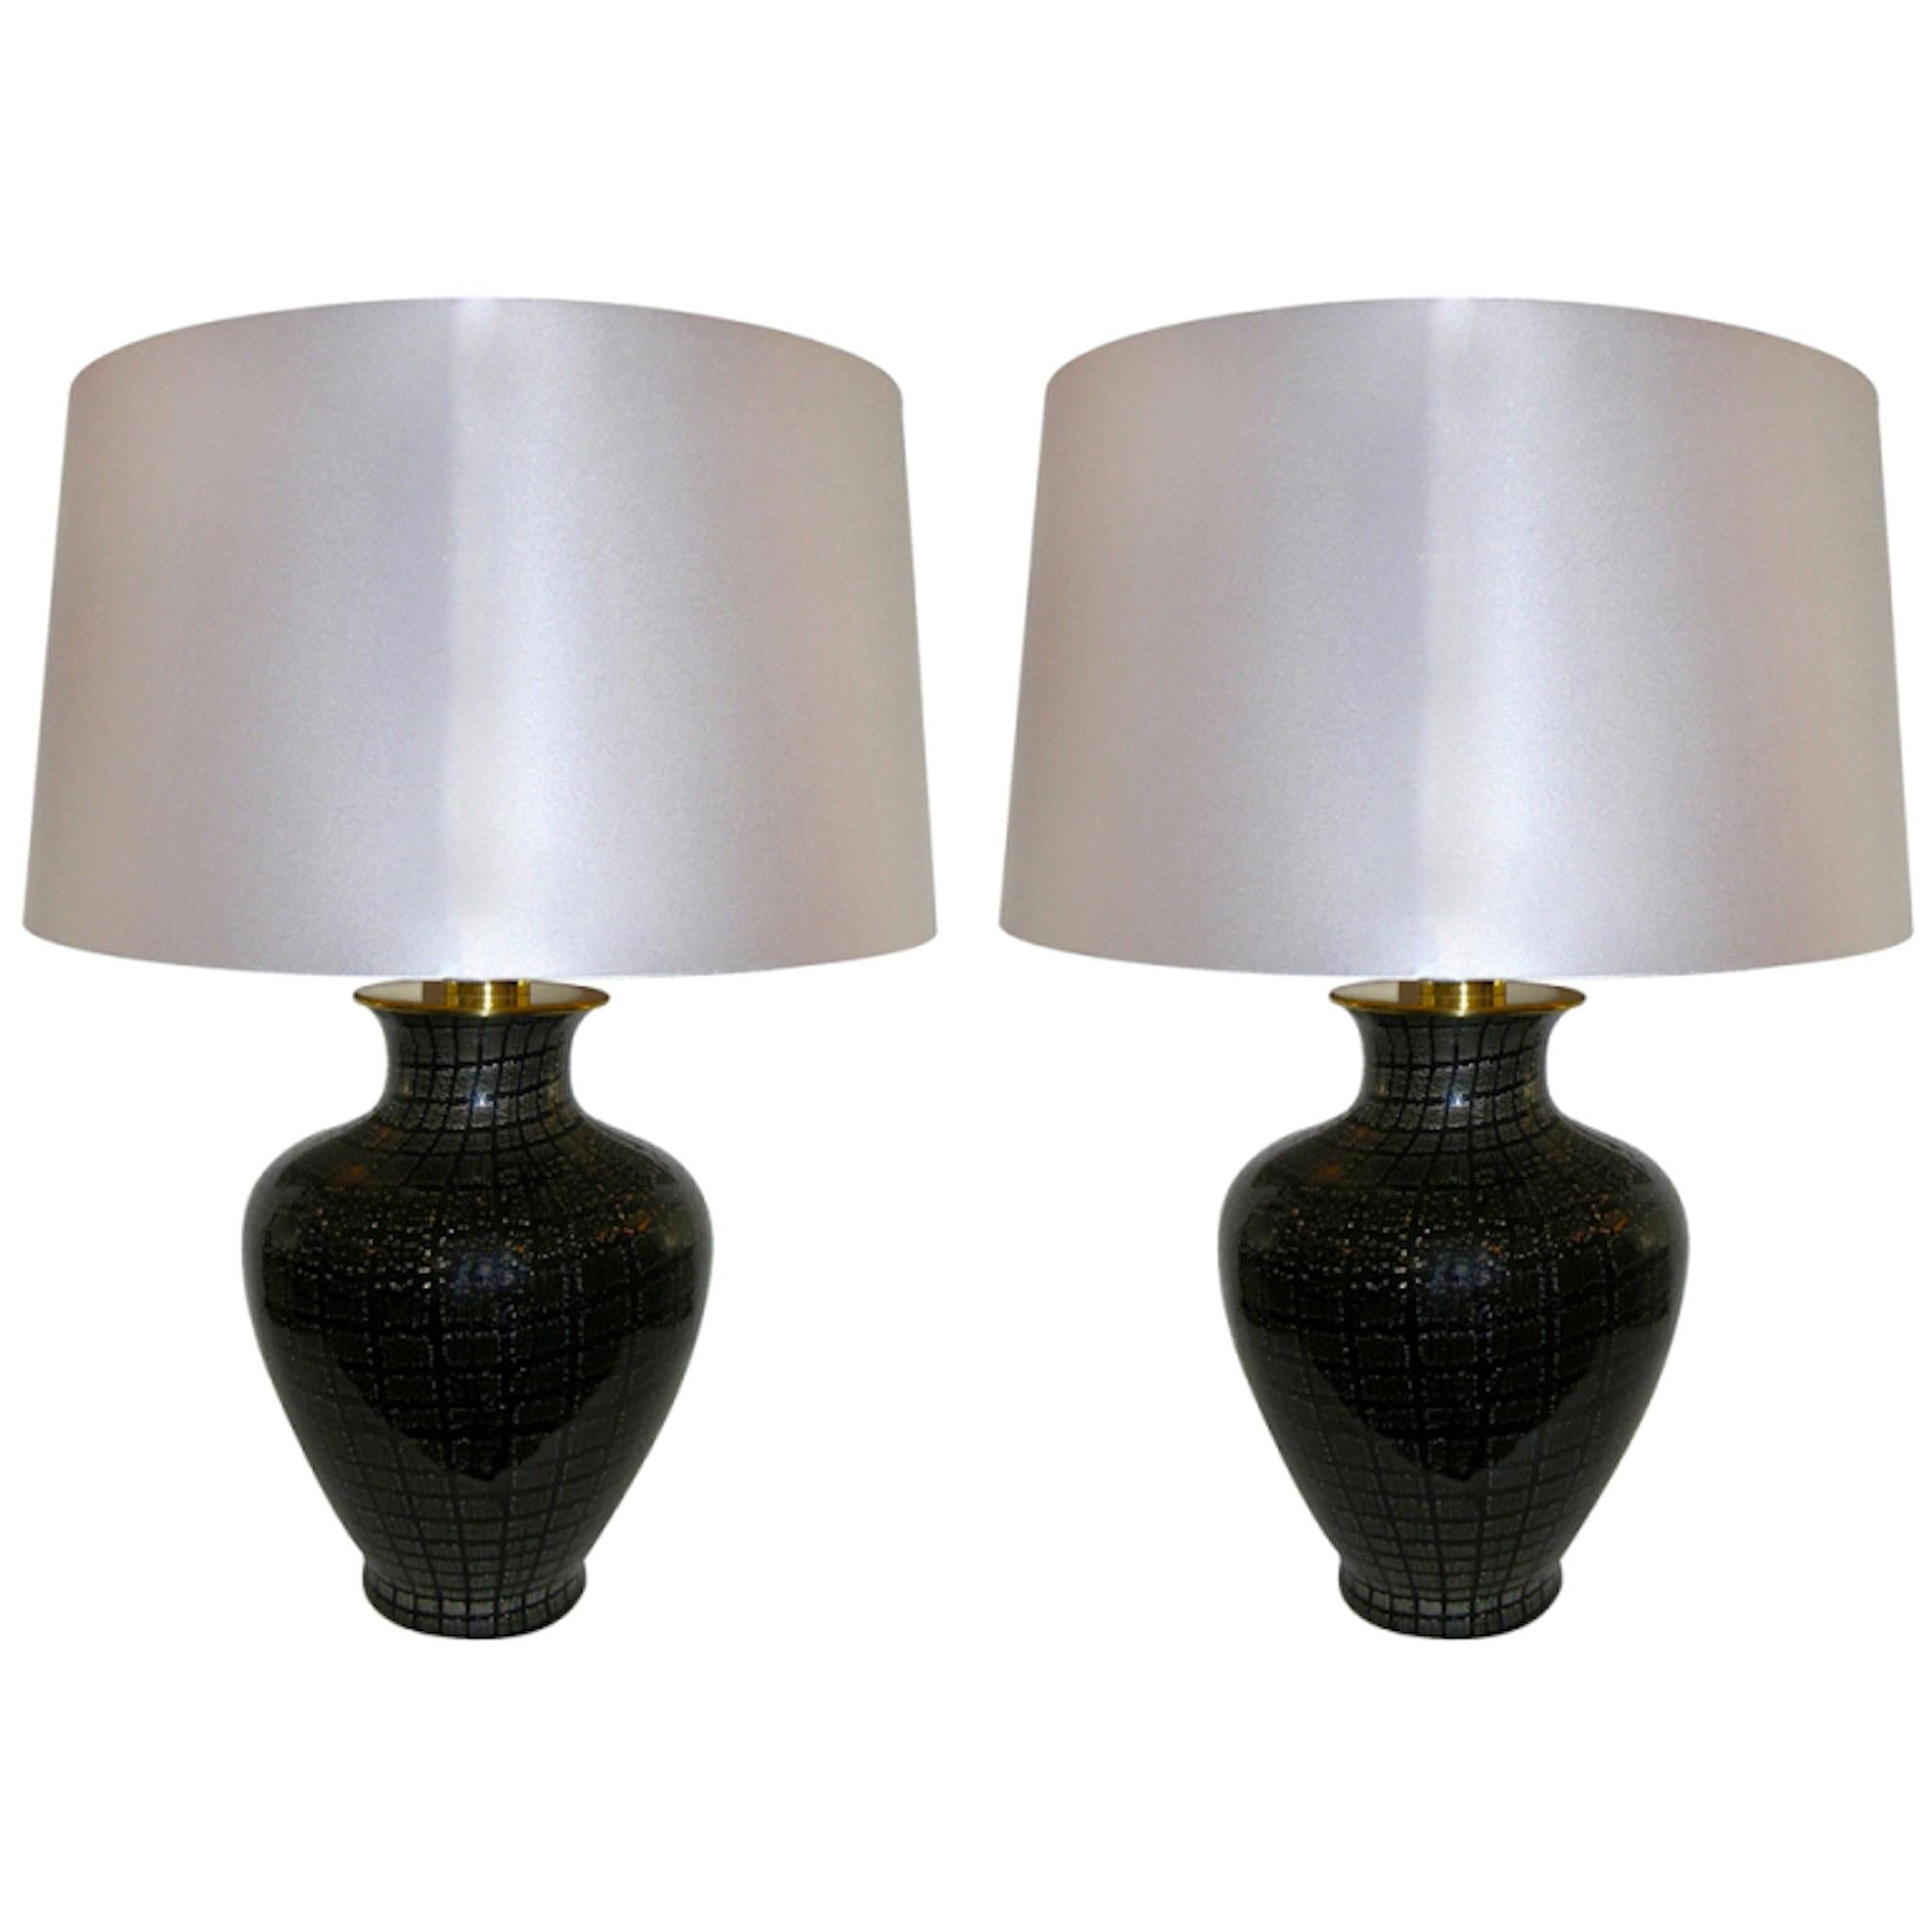 VeArt Table Lamps